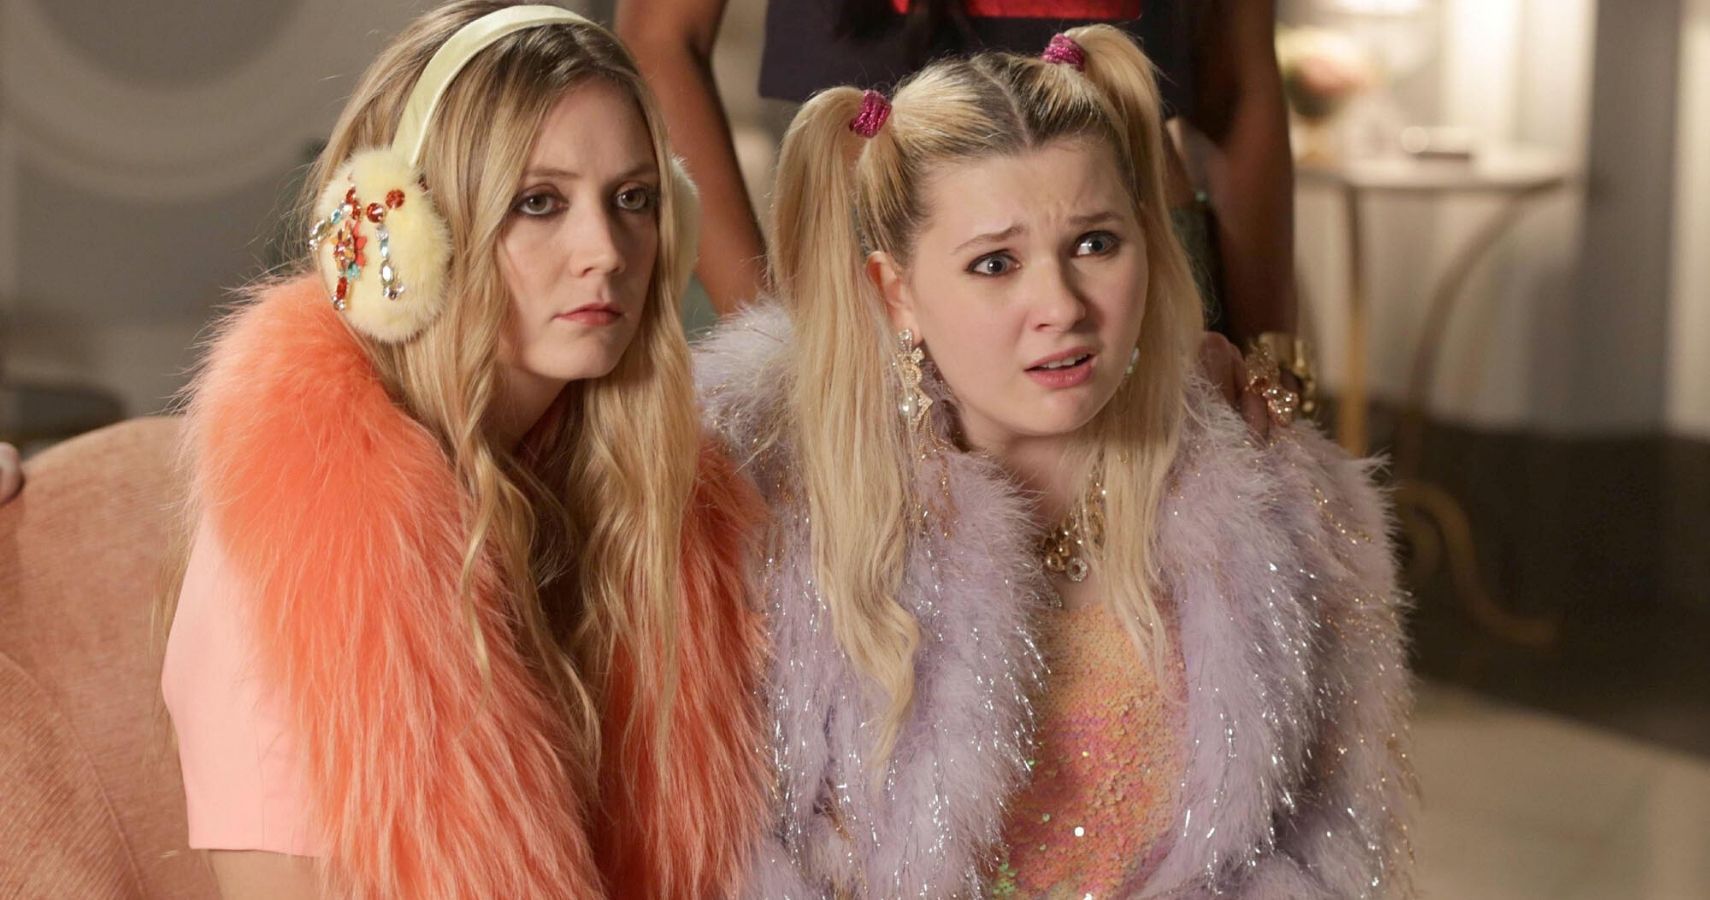 Scream Queens The 5 Best Outfits (& The 5 Worst), Ranked